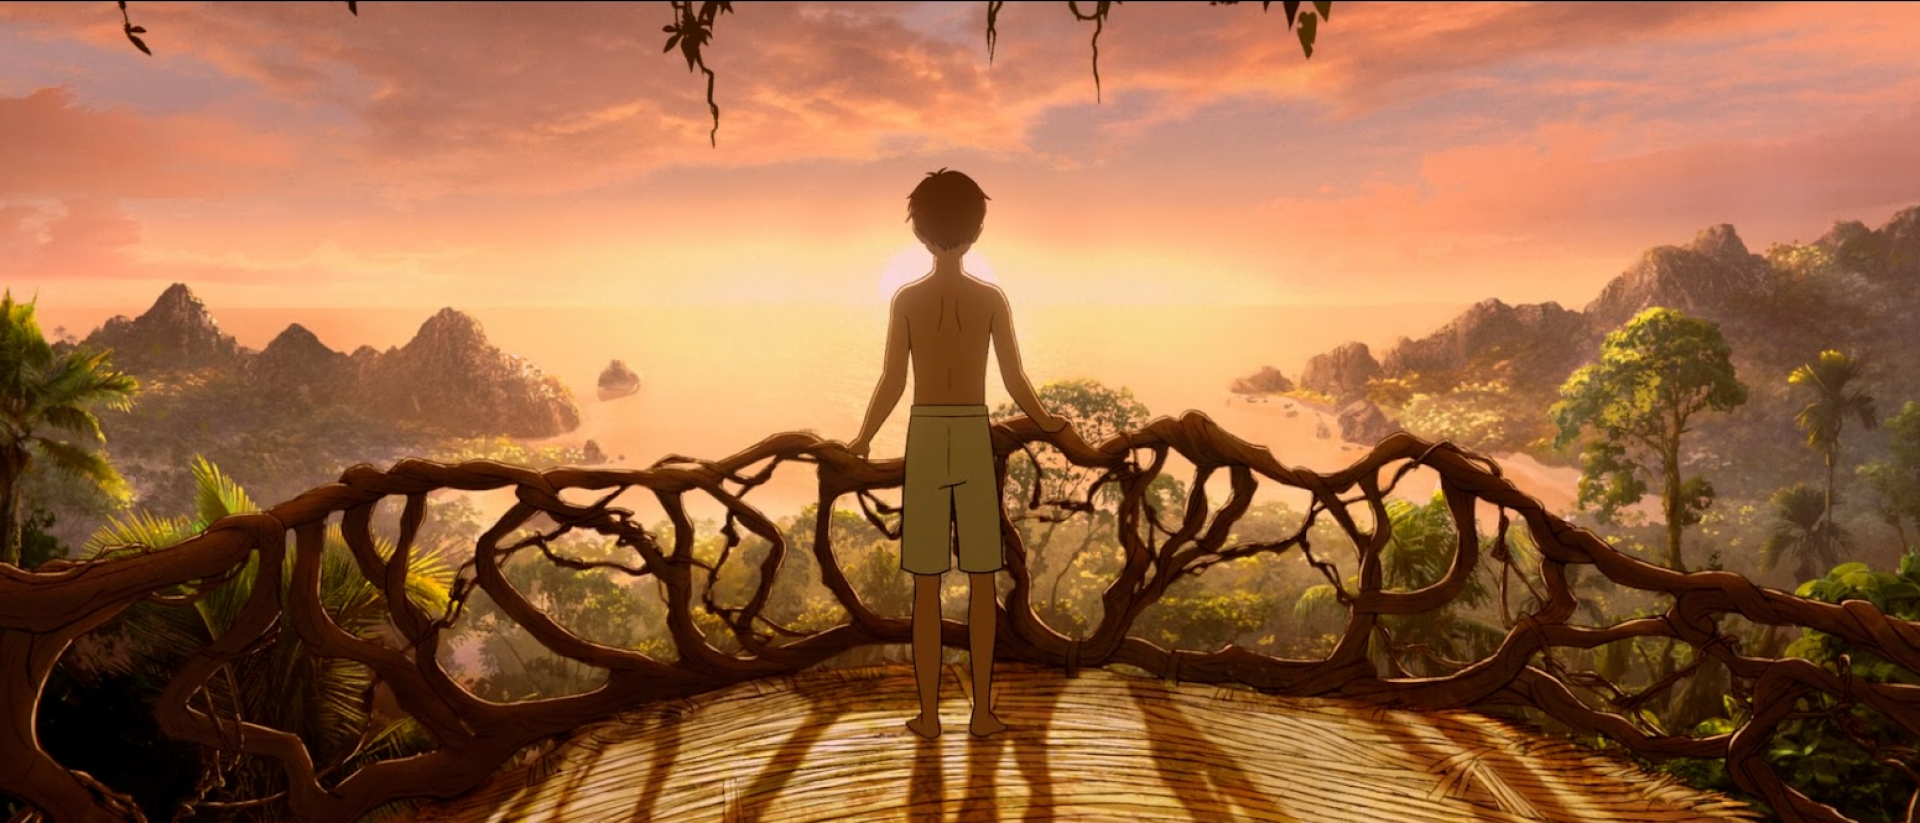 still from kensuke's kingdom featuring a boy standing on a wooden balcony looking out over a forest horizon